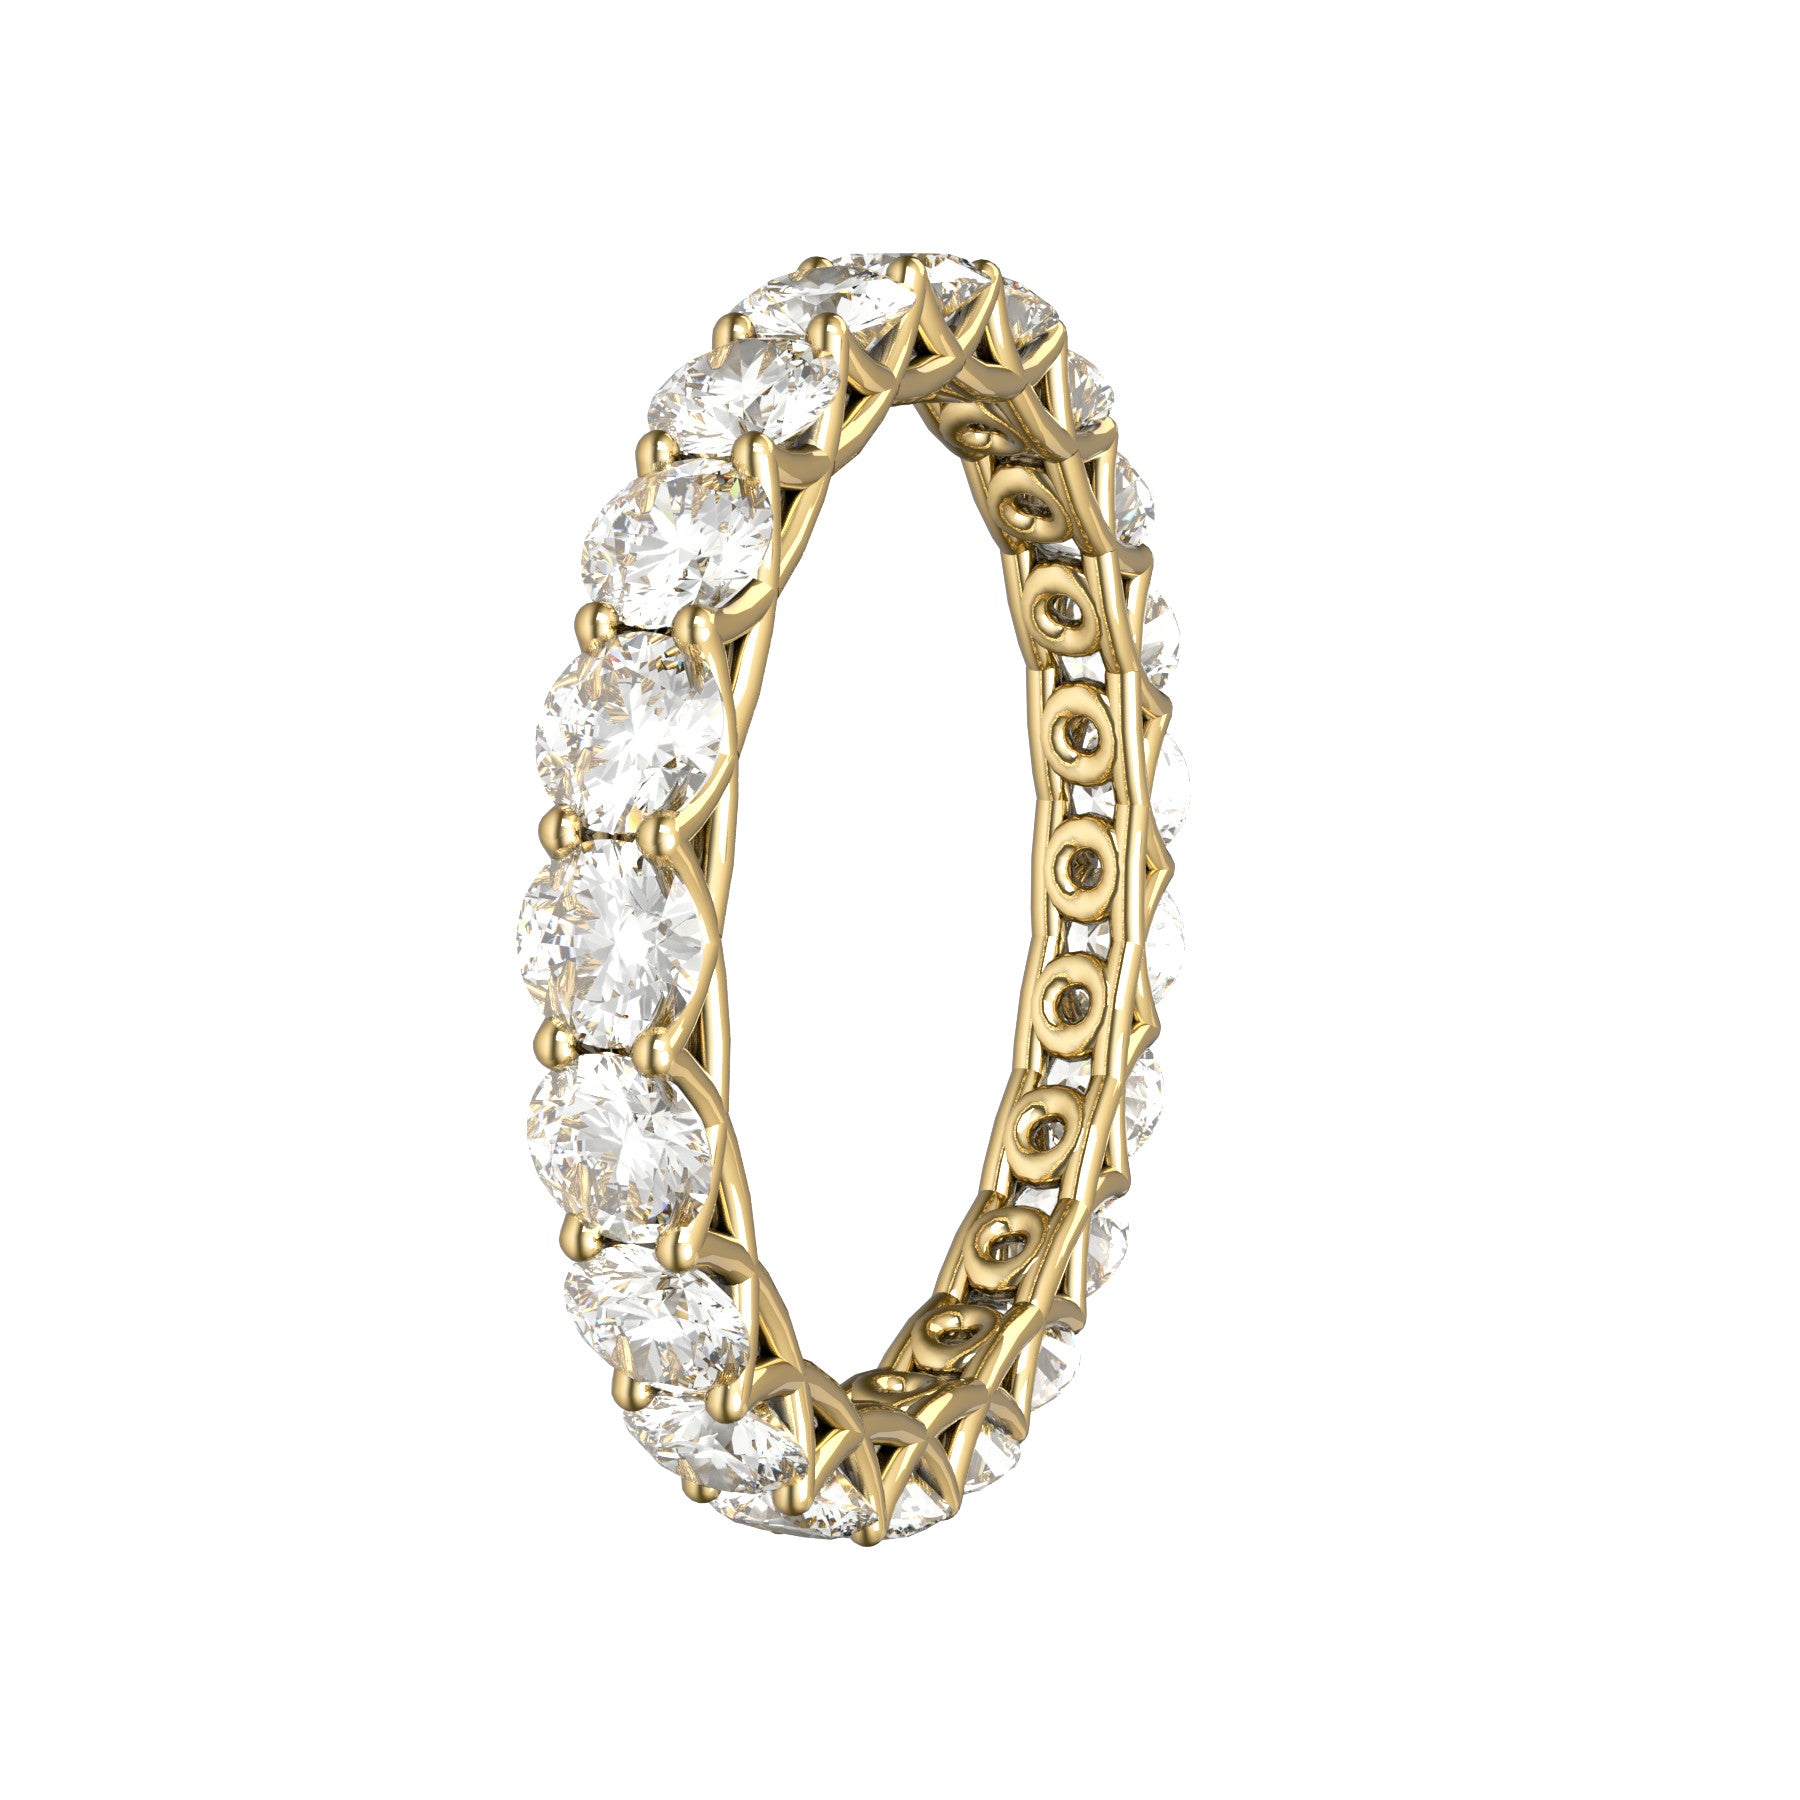 sweet hearts wedding band, 18 K yellow gold, 0,10 natural diamonds, weight about 1,90 g. (0.07 oz), width 3,00 mm